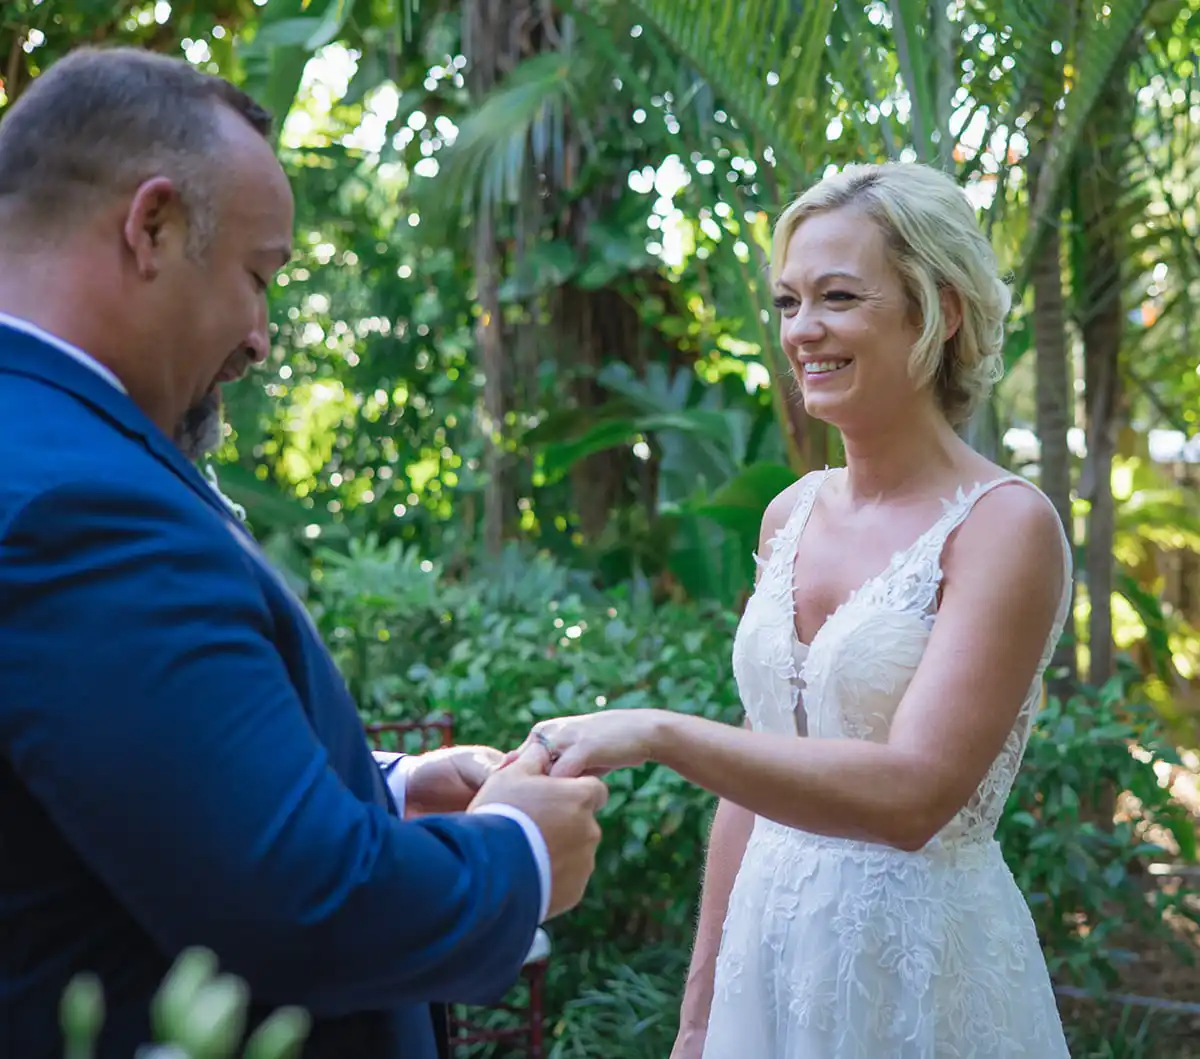 A bride and groom exchanging their wedding rings in a garden with the assistance of a key west wedding officiant.